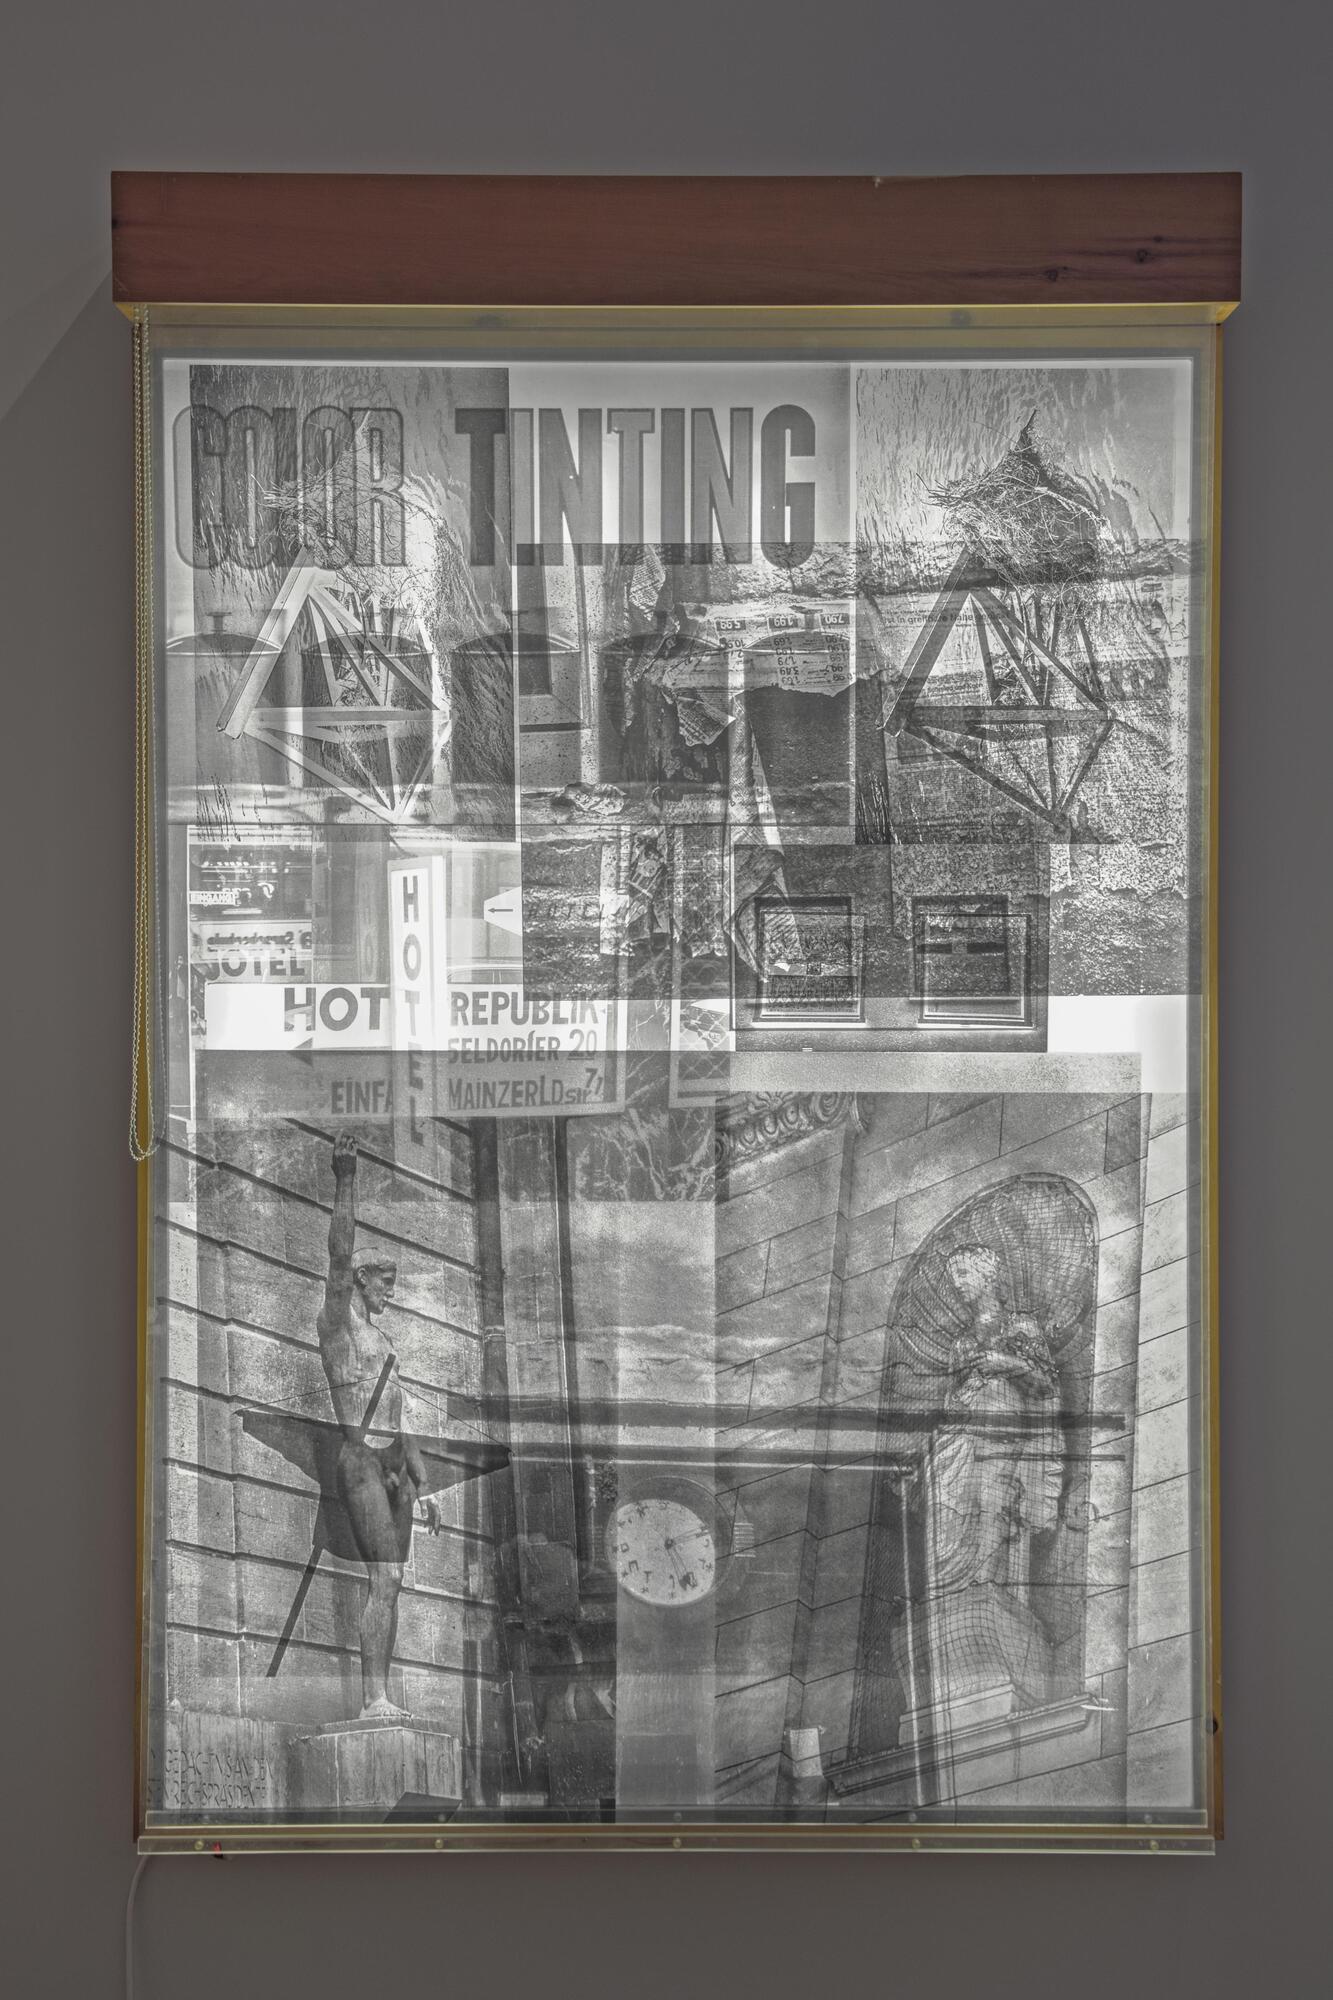 This mixed media assemblage has a series of see-through panels hanging from a wooden frame with a lightbox at the back. On the hanging panels, there are photographs printed, with a variety of images of buildings, sculpture, and advertising.